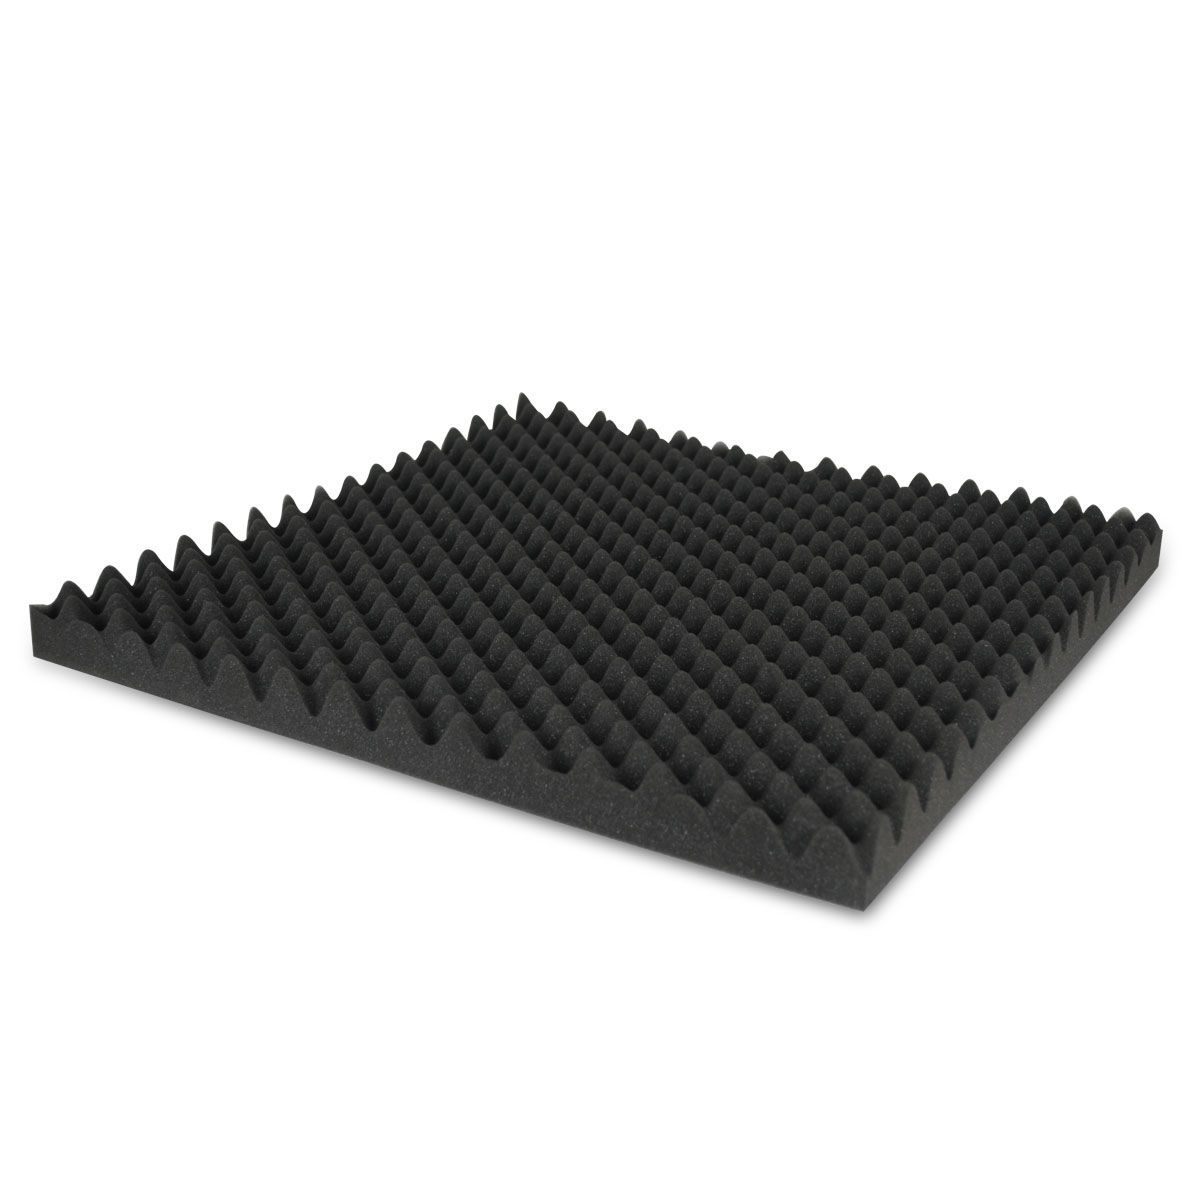 Sound Absorption Foam Square - 30 Sheets | Crazy Sales